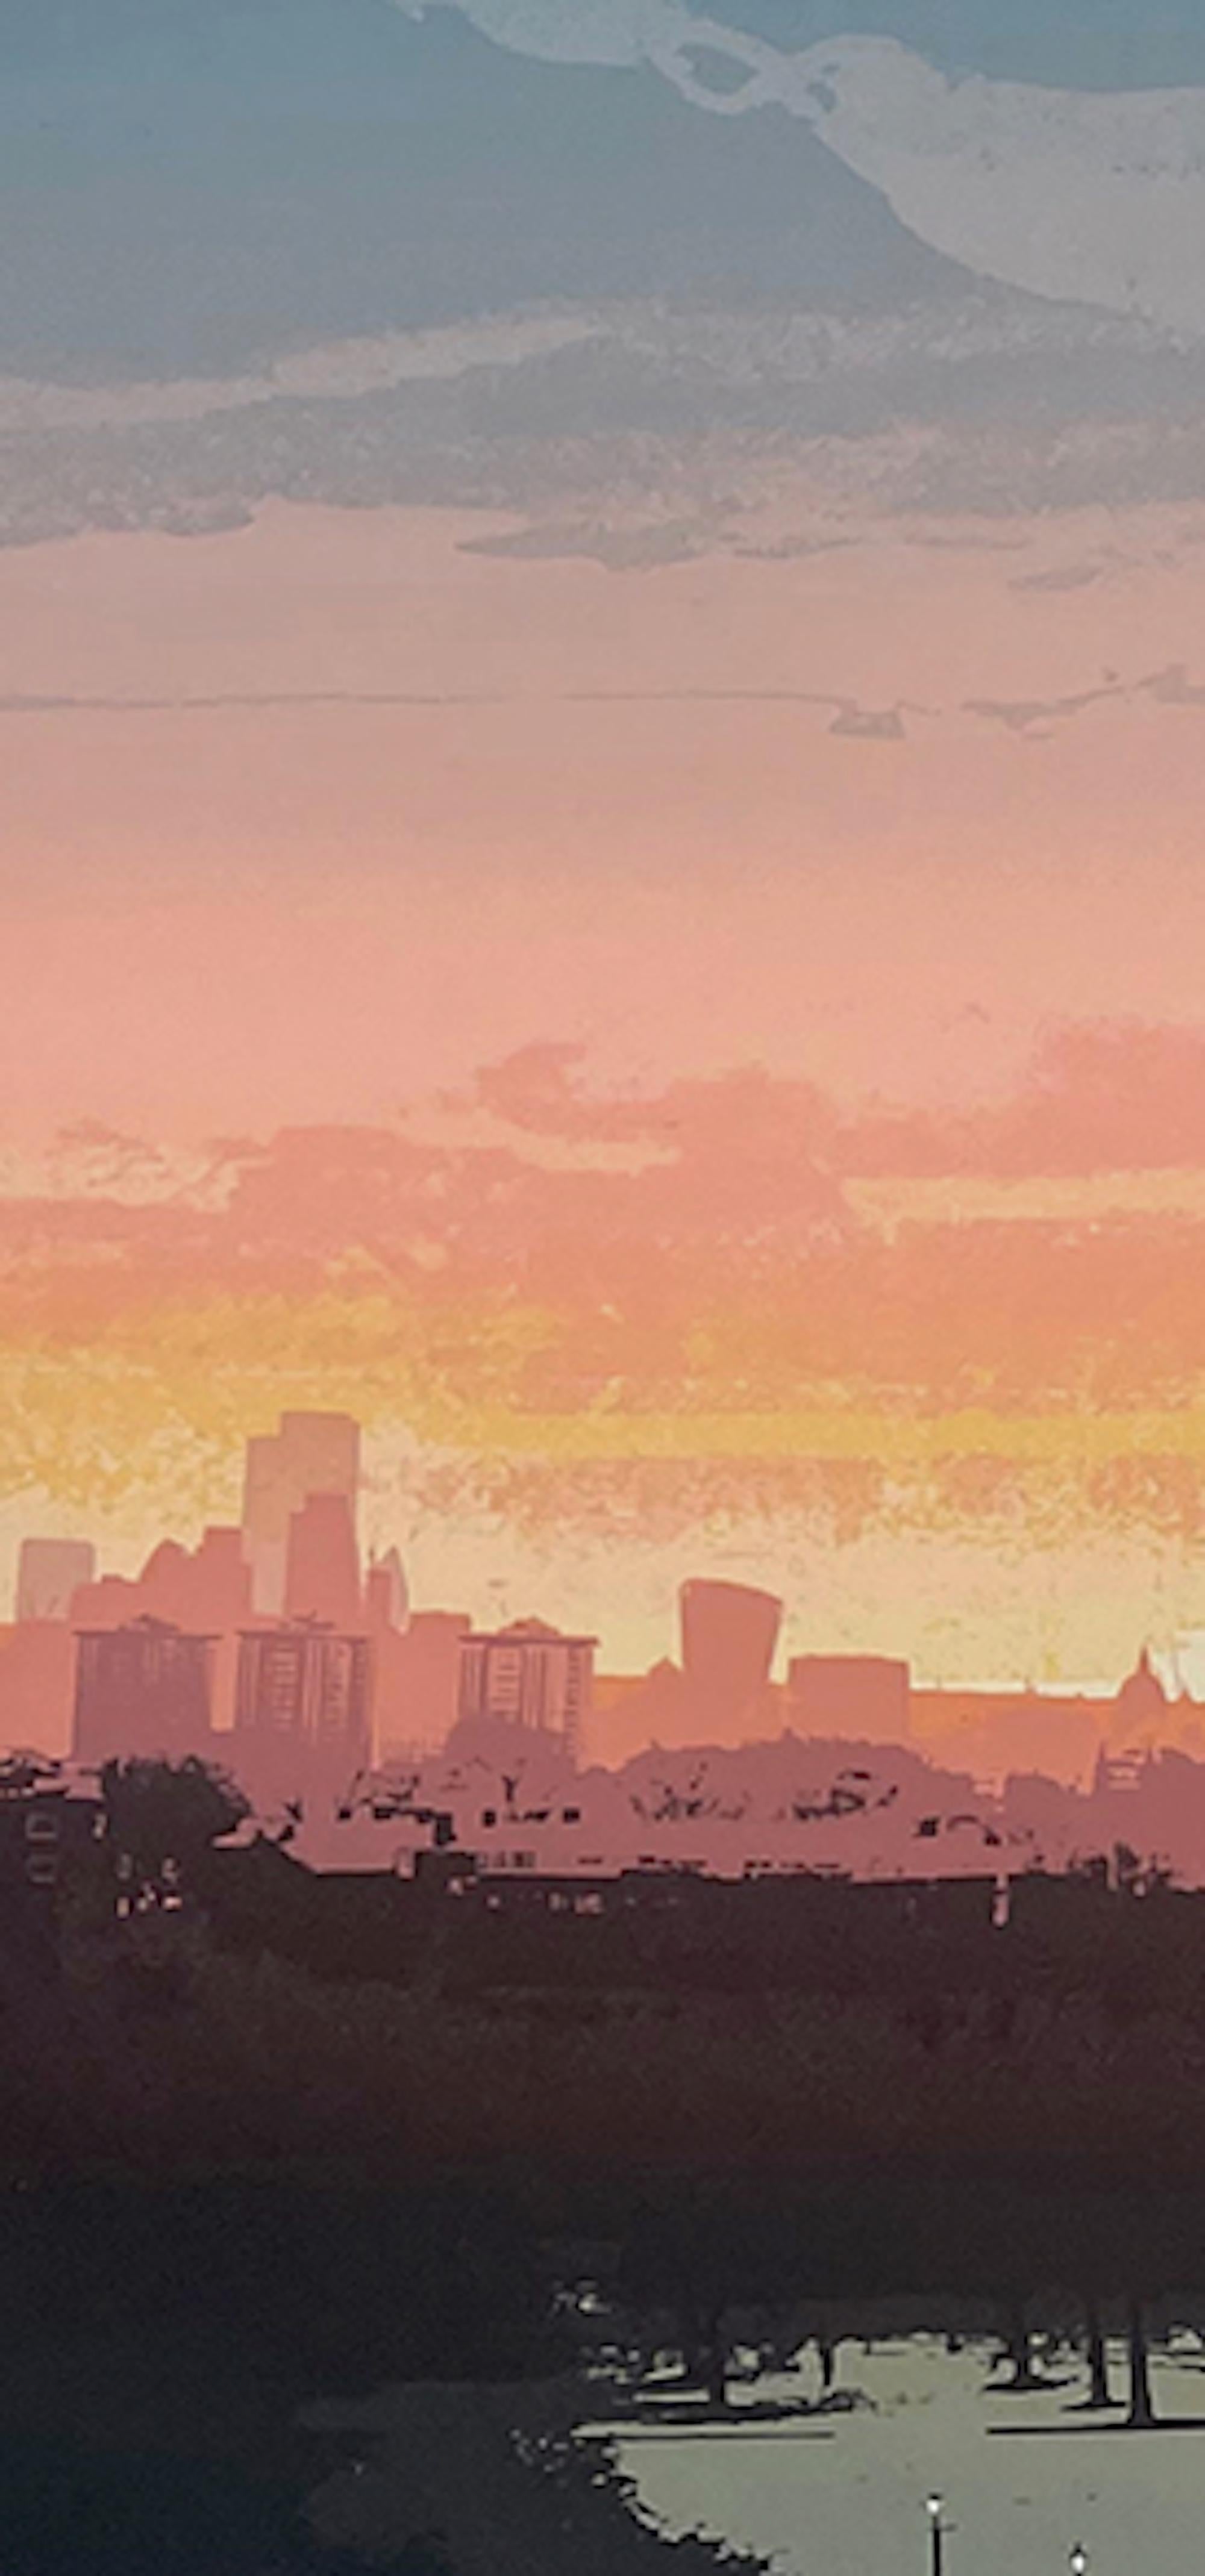 Based on an early visit to Primrose Hill in the winter to watch the sun come up. This piece is created using techniques that blend photography, painting and screenprinting. Built up with multiple blend layers to capture the spectacular atmosphere of